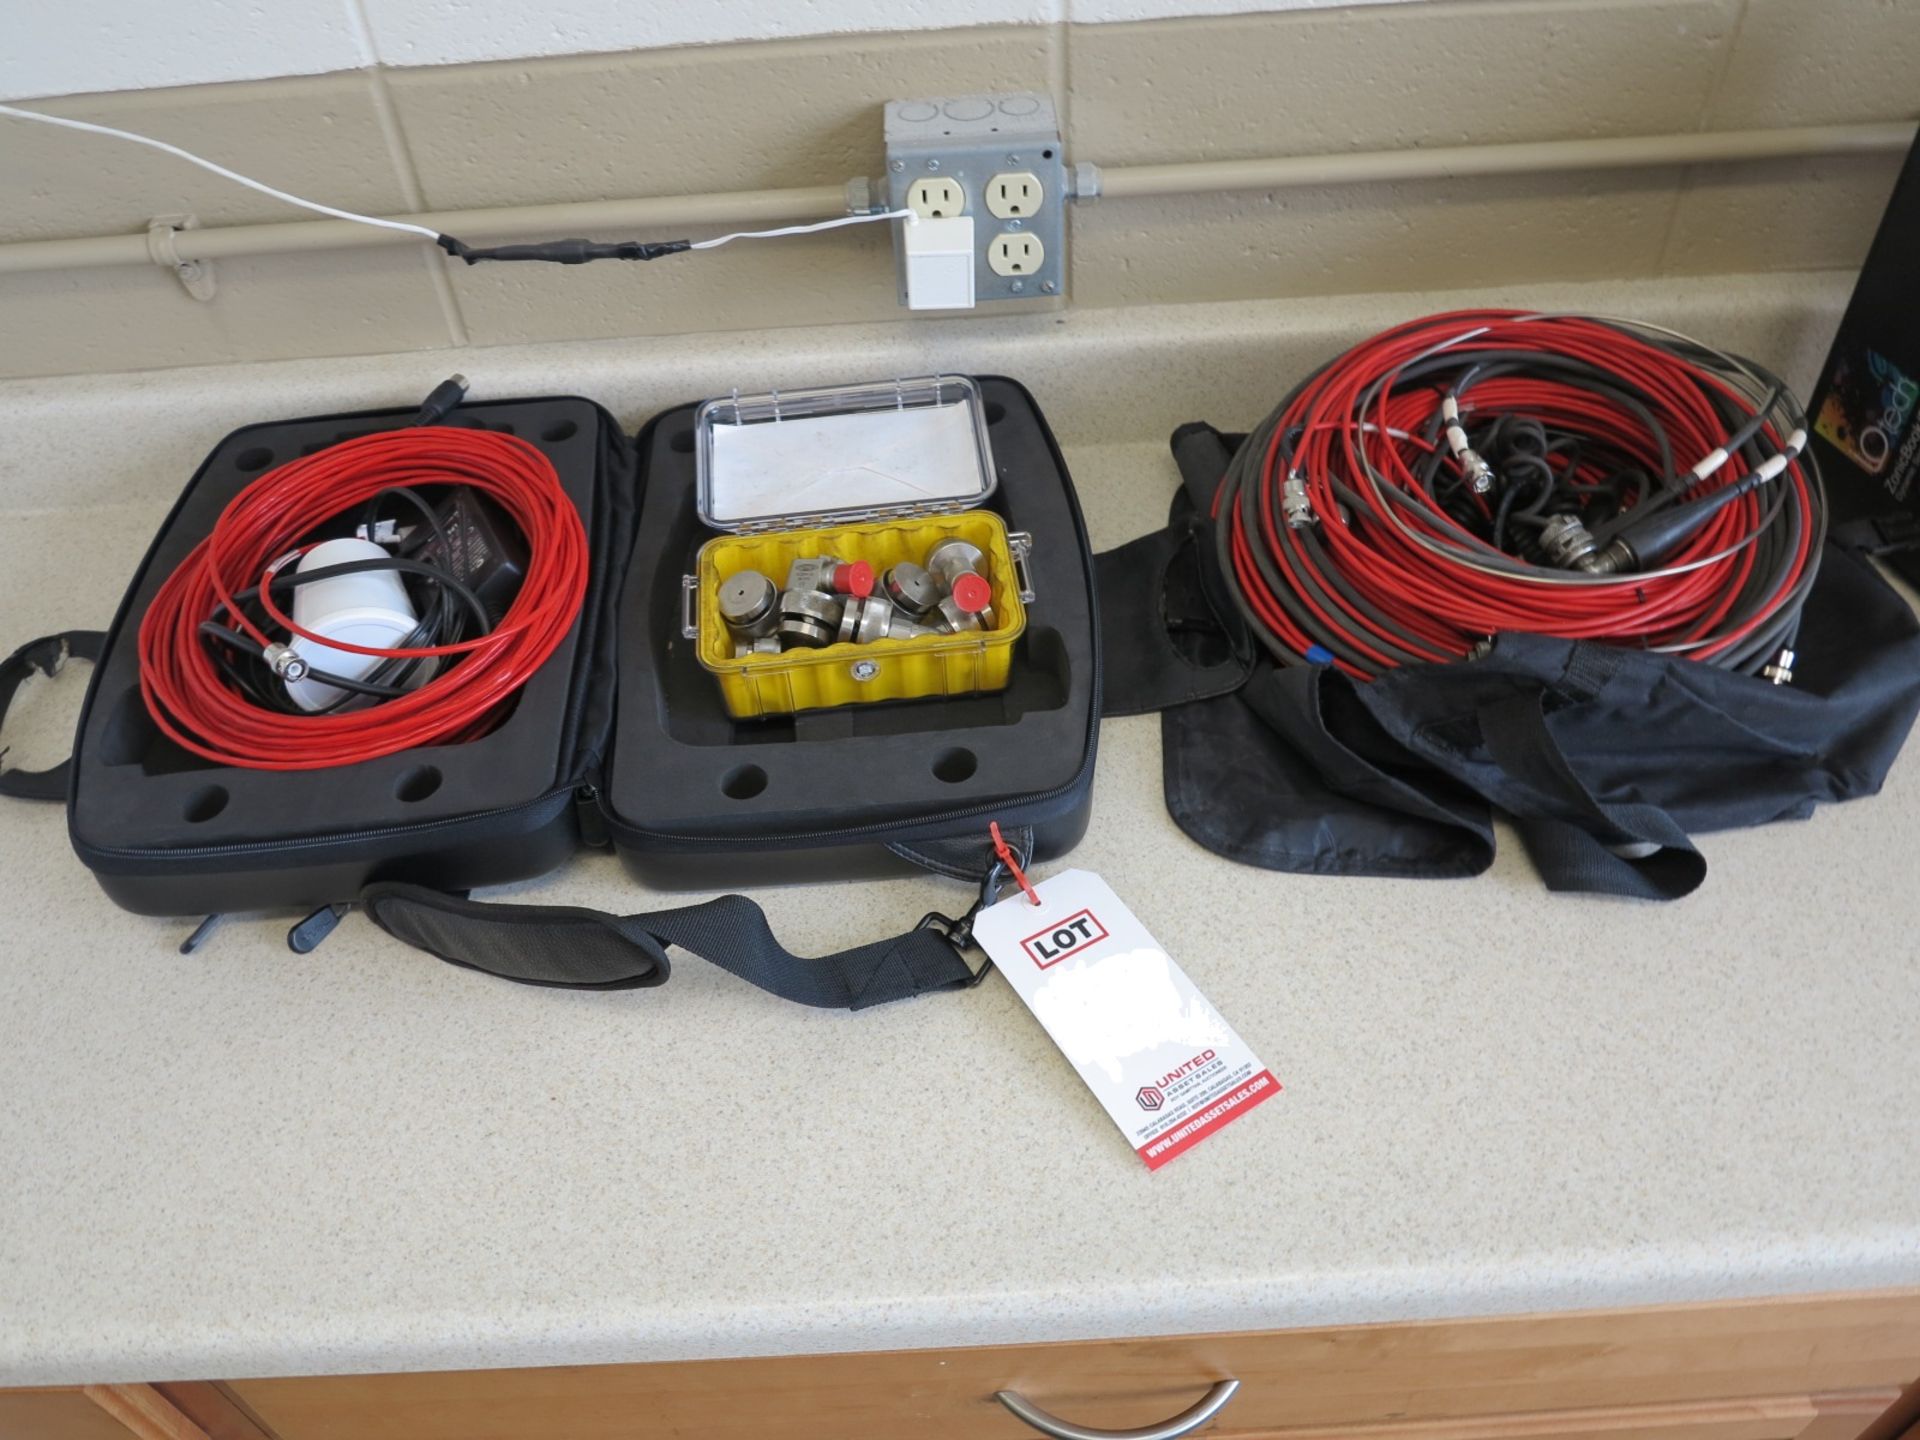 LOT - CTC CALIBRATION UNIT AND MISC ACCESSORIES - Image 2 of 4